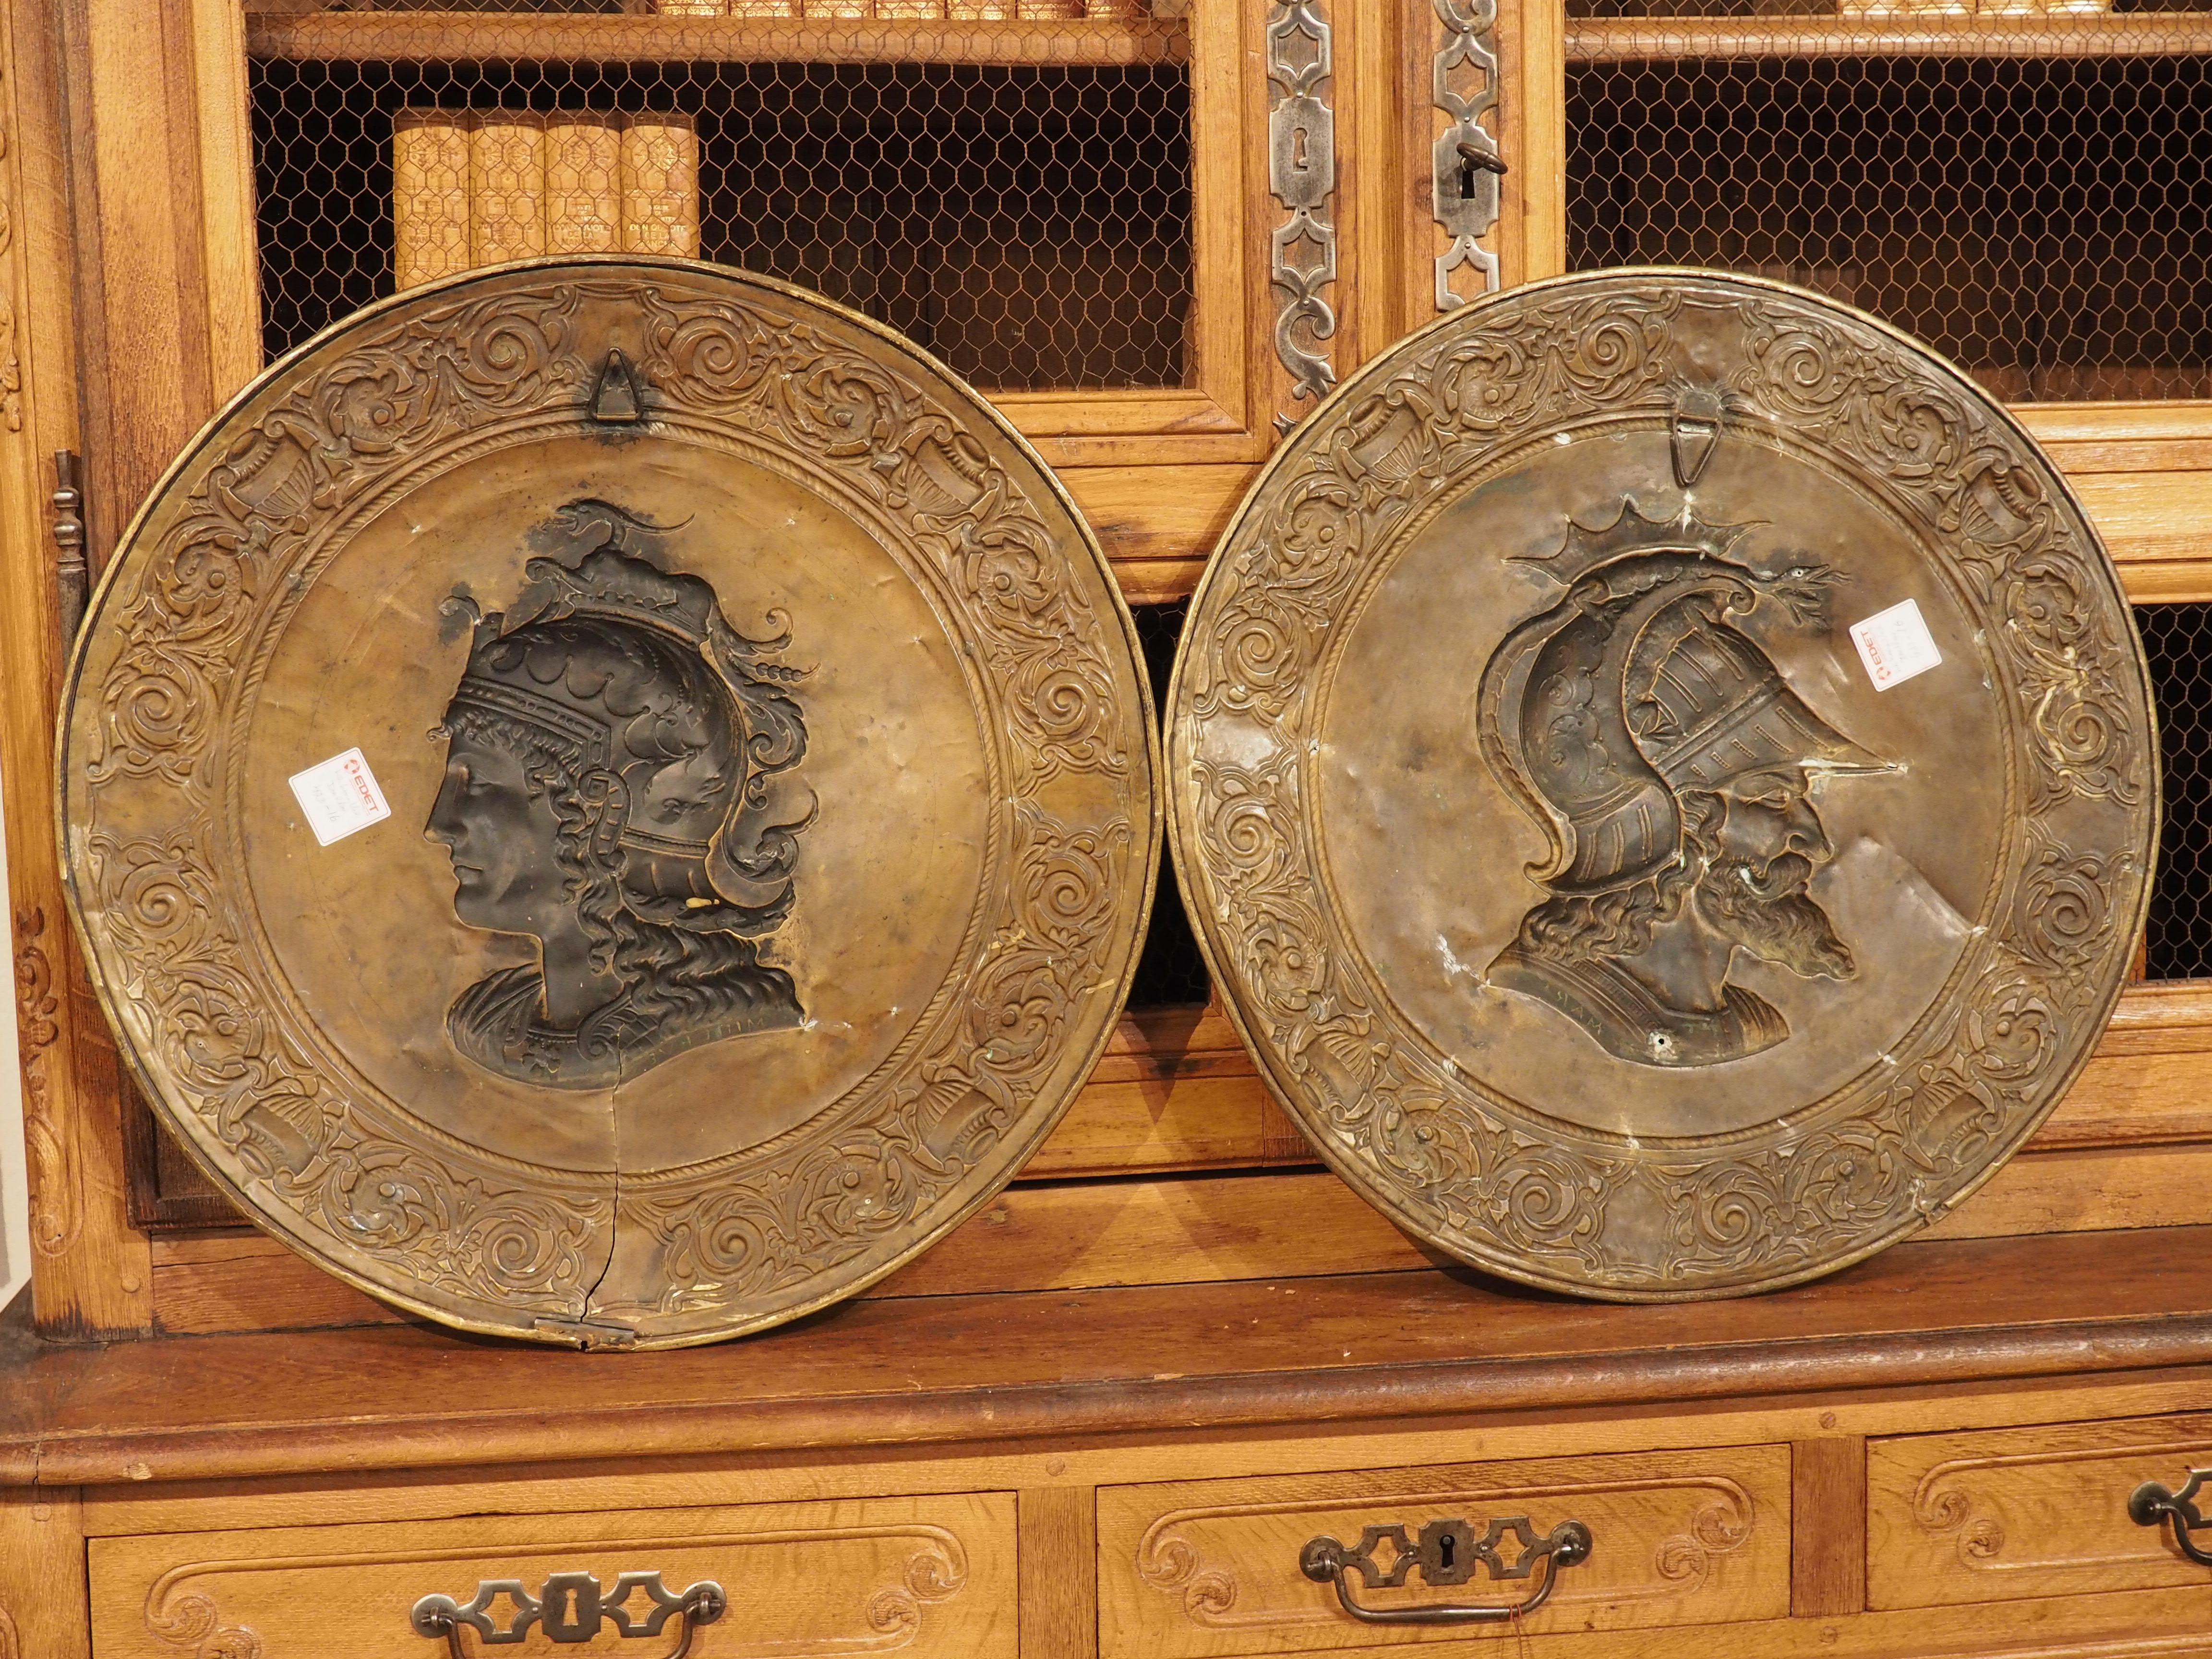 Possibly inspired by a 1771 painting by Jacques-Louis David, this set of large brass chargers depict the Roman deities, Mars and Minerva. The painting by David (Minerva Fighting Mars) is currently on display at the Louvre and was awarded second